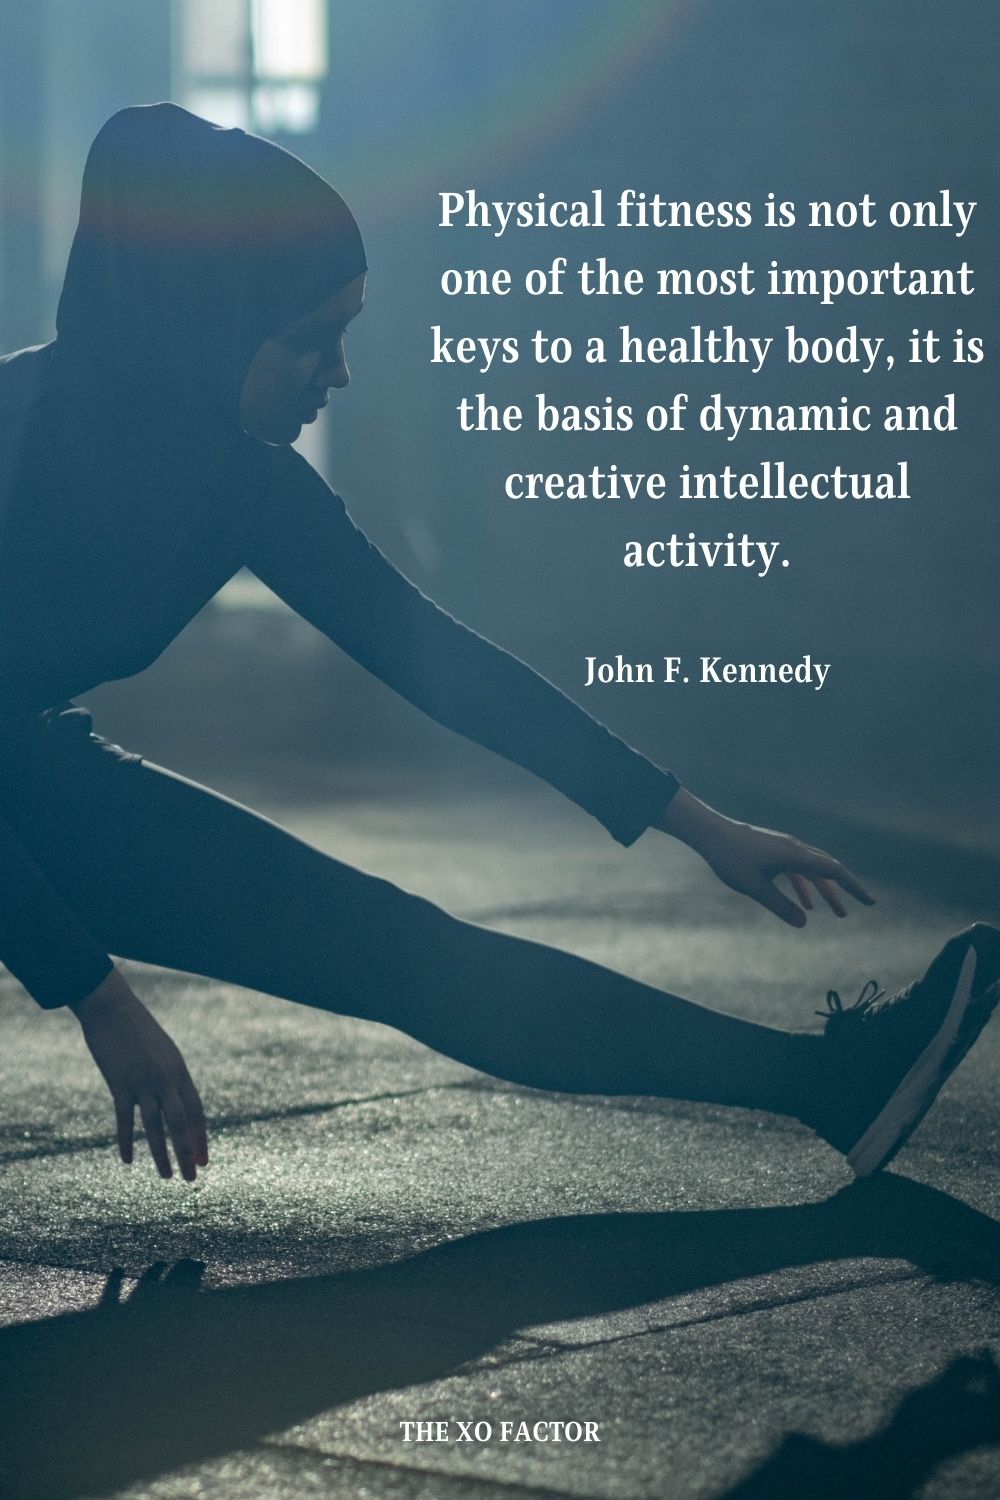 Physical fitness is not only one of the most important keys to a healthy body, it is the basis of dynamic and creative intellectual activity. John F. Kennedy